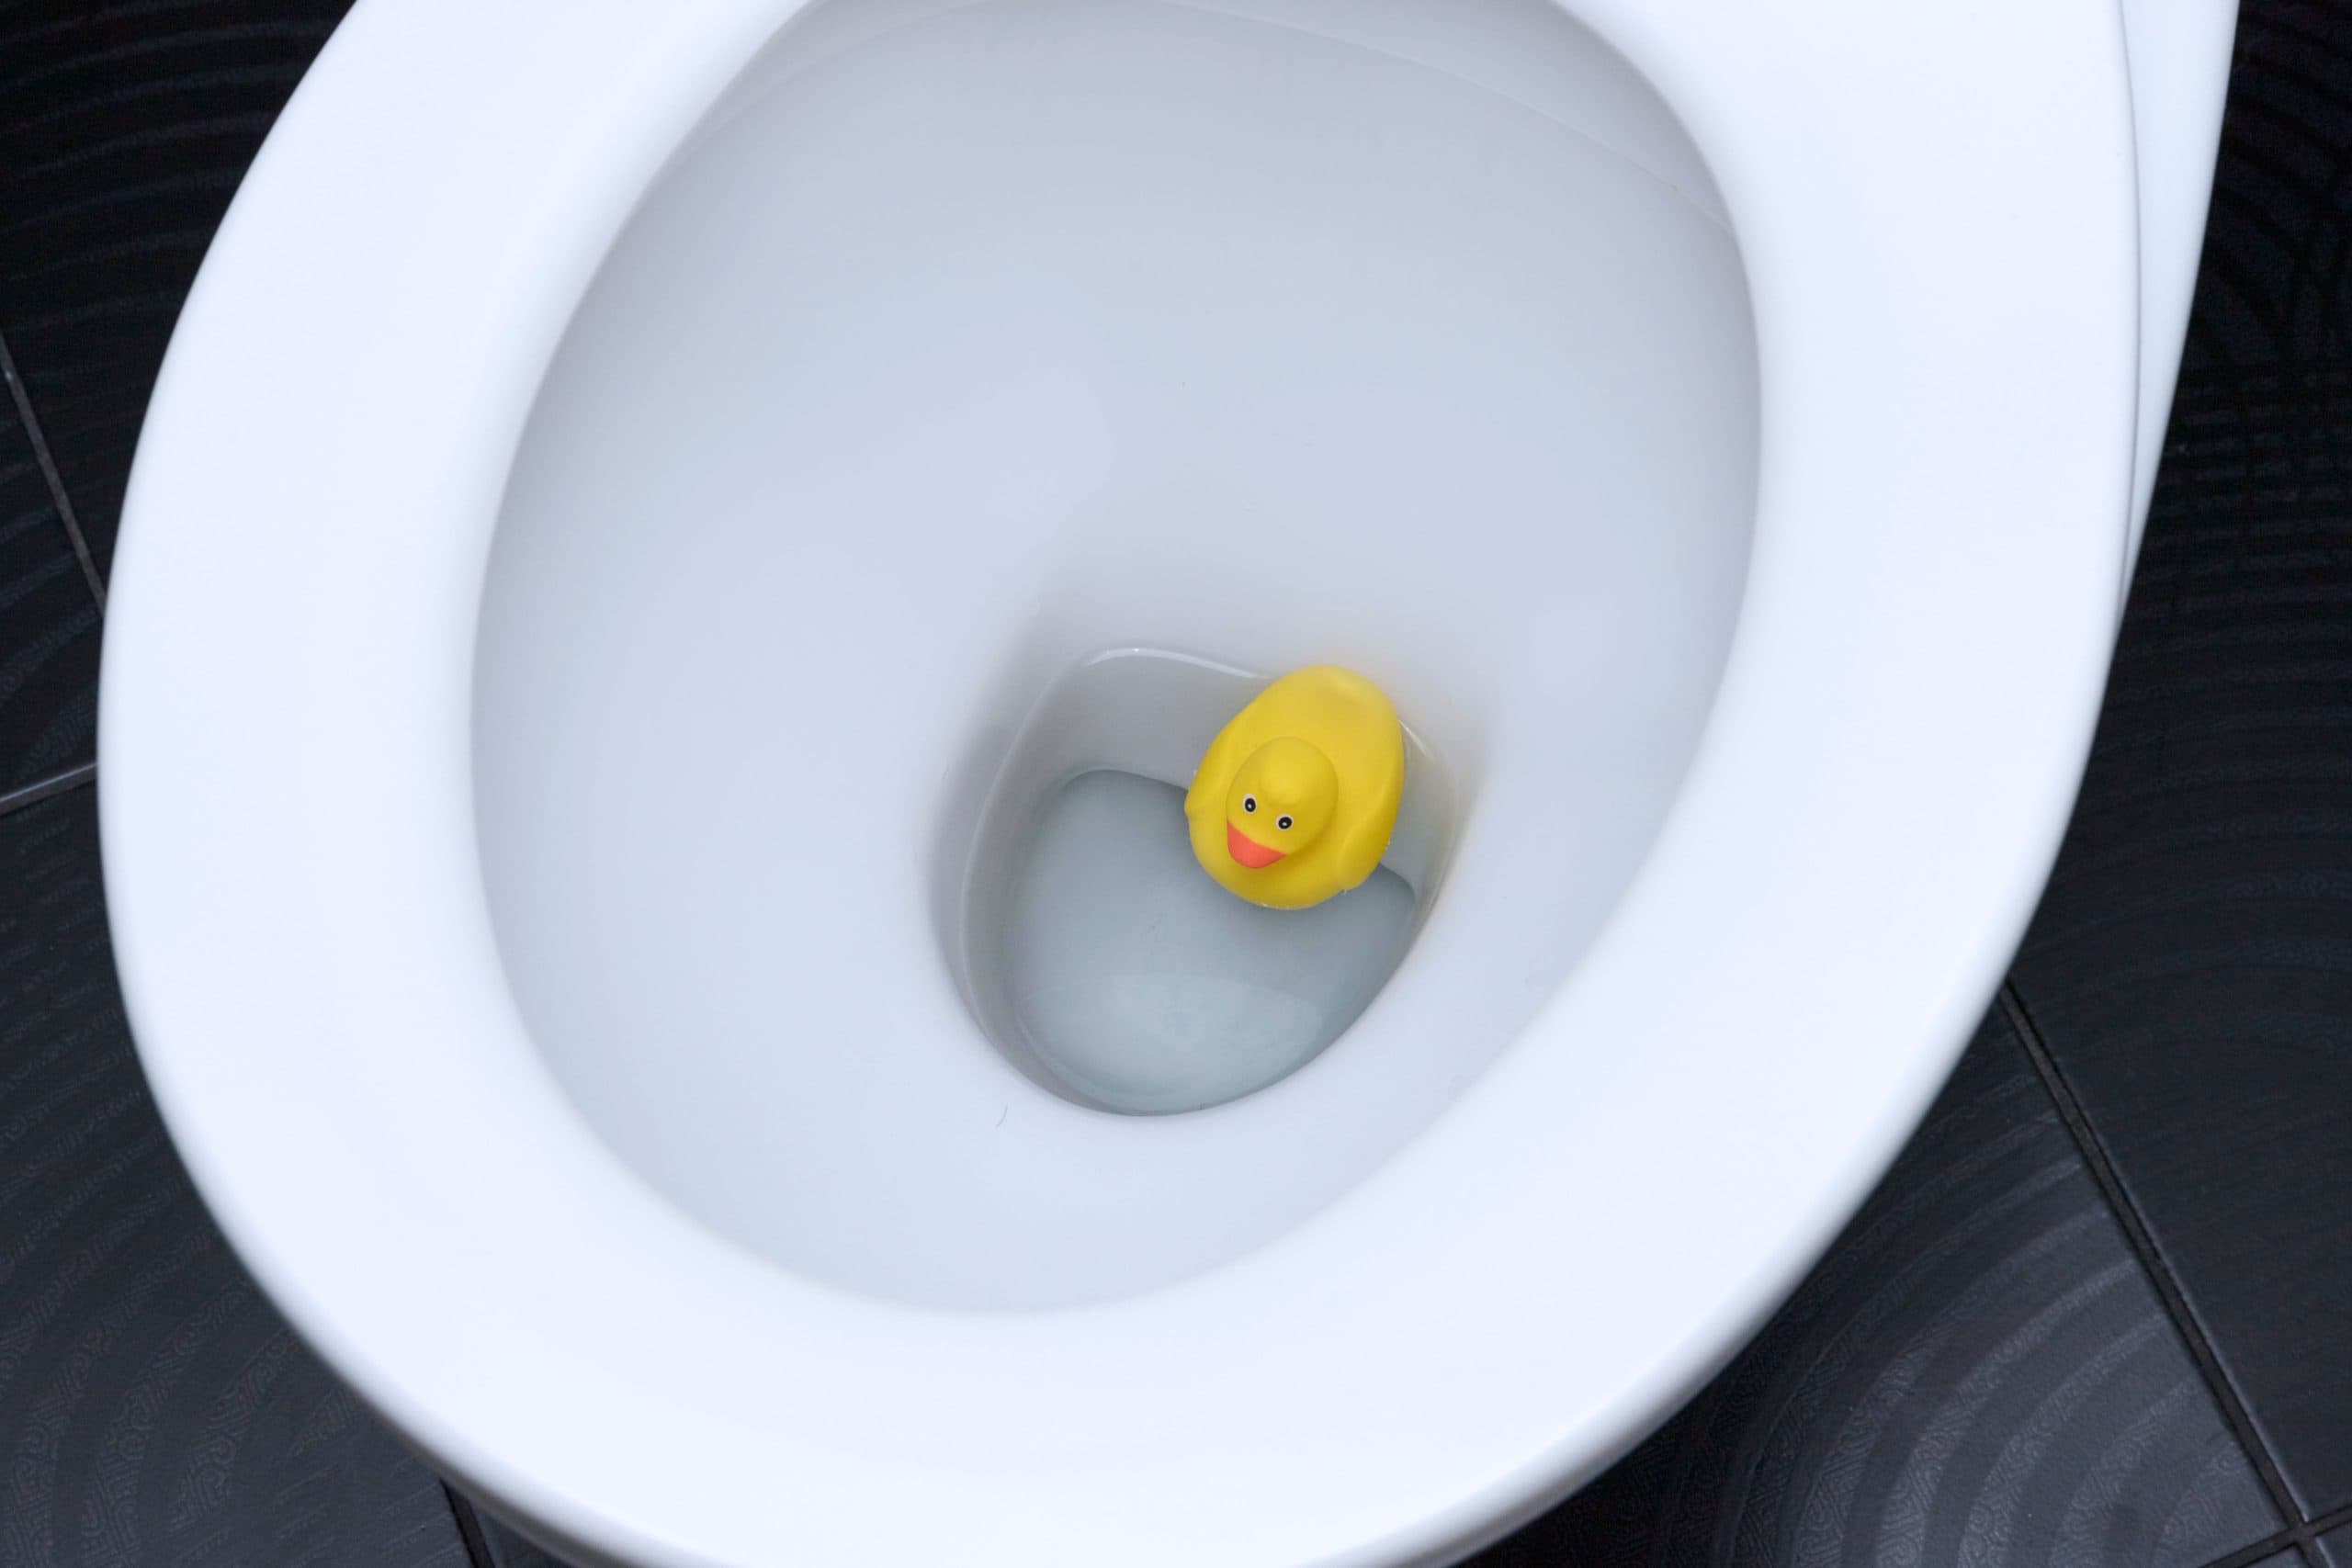 Plastic model of a yellow duck floating in a toilet bowl, toilet.